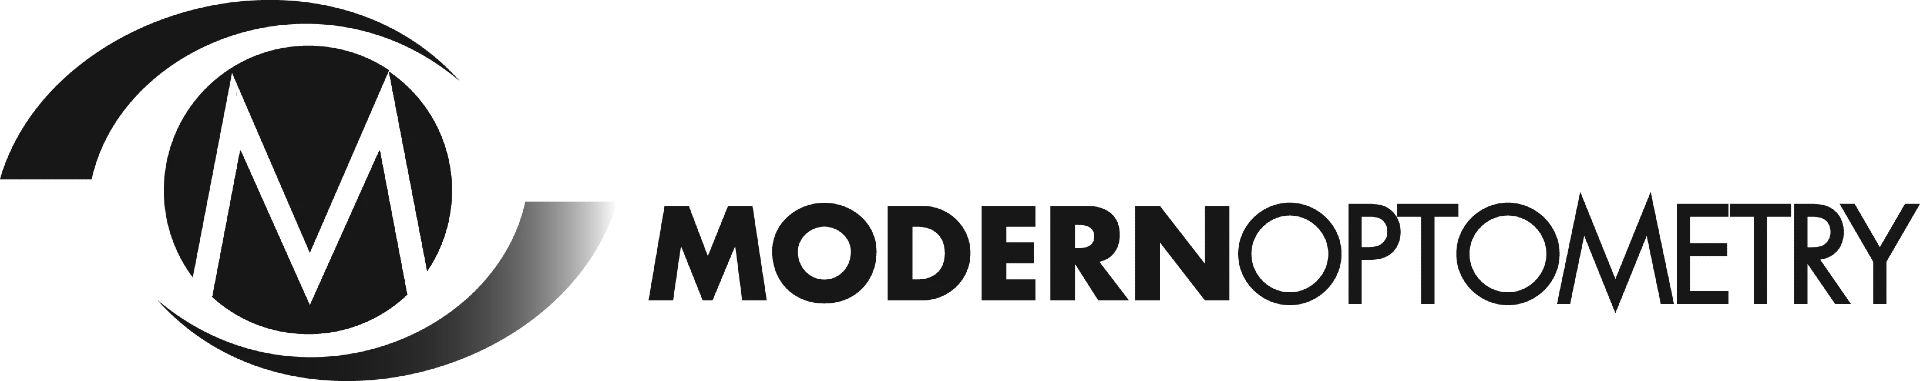 A Logo Featuring A Circular Design With A Stylized &Quot;M&Quot; Inside, Followed By The Text &Quot;Modern Optometry&Quot; In Bold, Uppercase Letters. The Entire Logo Is In Black, Emphasizing Its Connection To Advanced Nidek Technology.